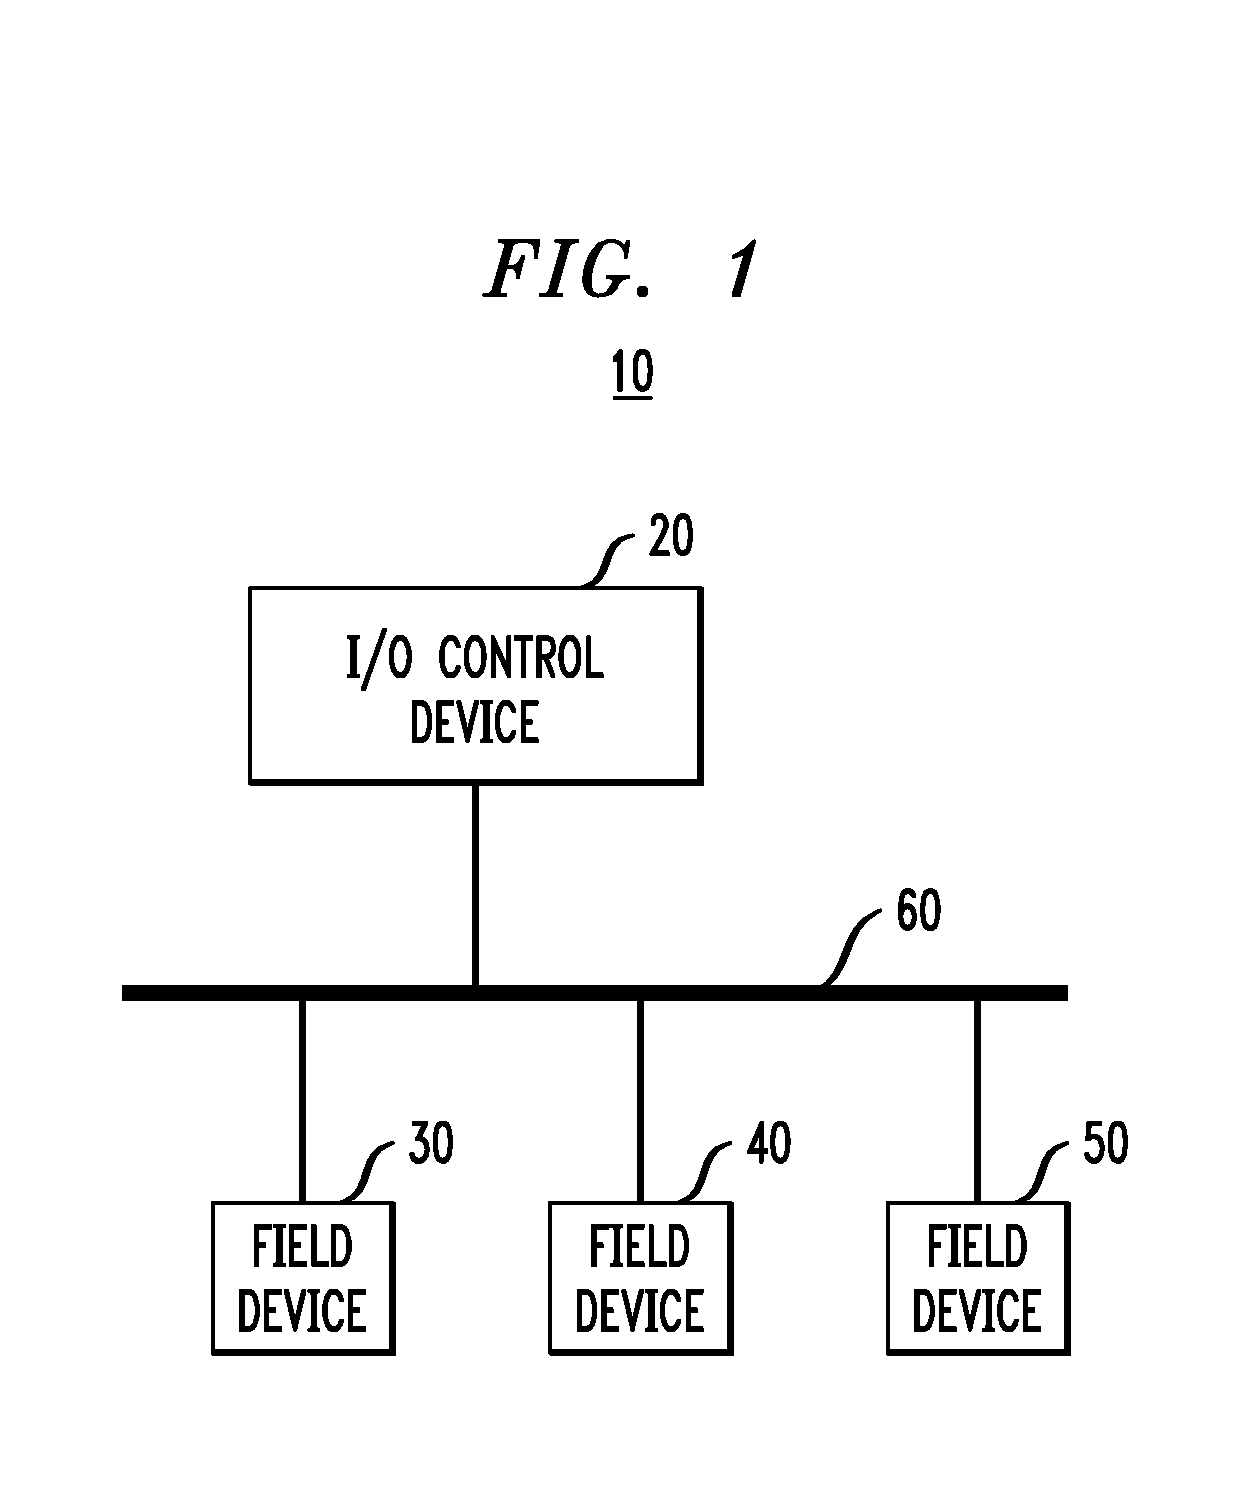 Method and Installation for Optimized Transmission of Data Between a Control Device and a Plurality of Field Devices